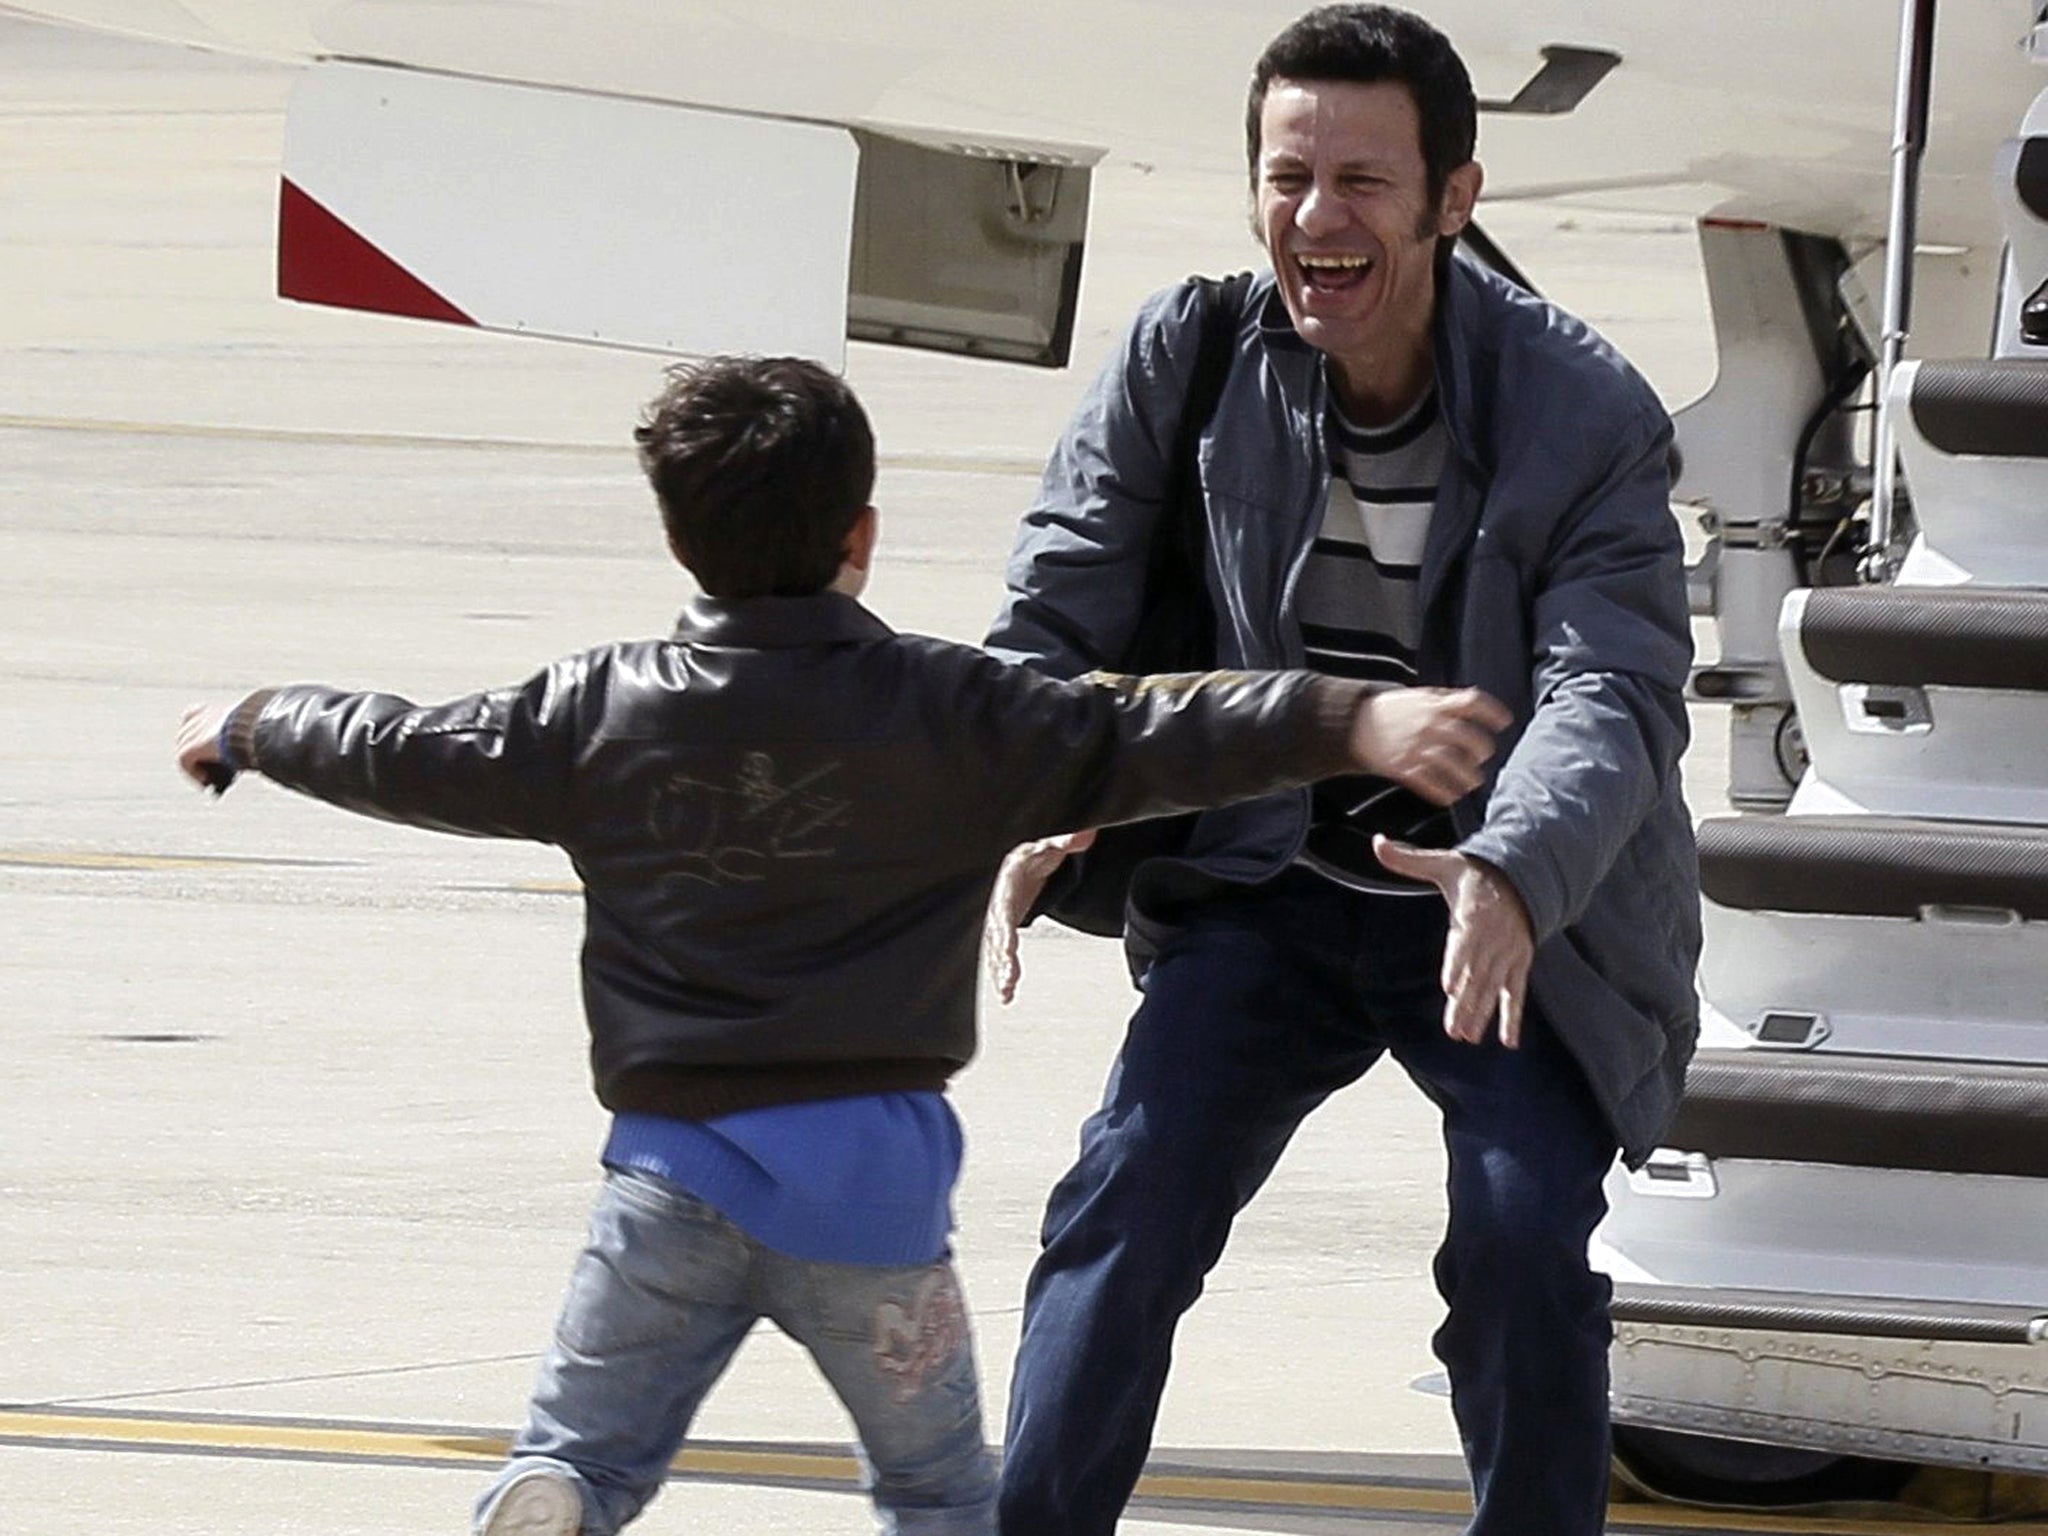 Dad’s home at last: the moment of pure joy yesterday when Spanish journalist Javier Espinosa was reunited with his son after being held hostage in Syria for six months